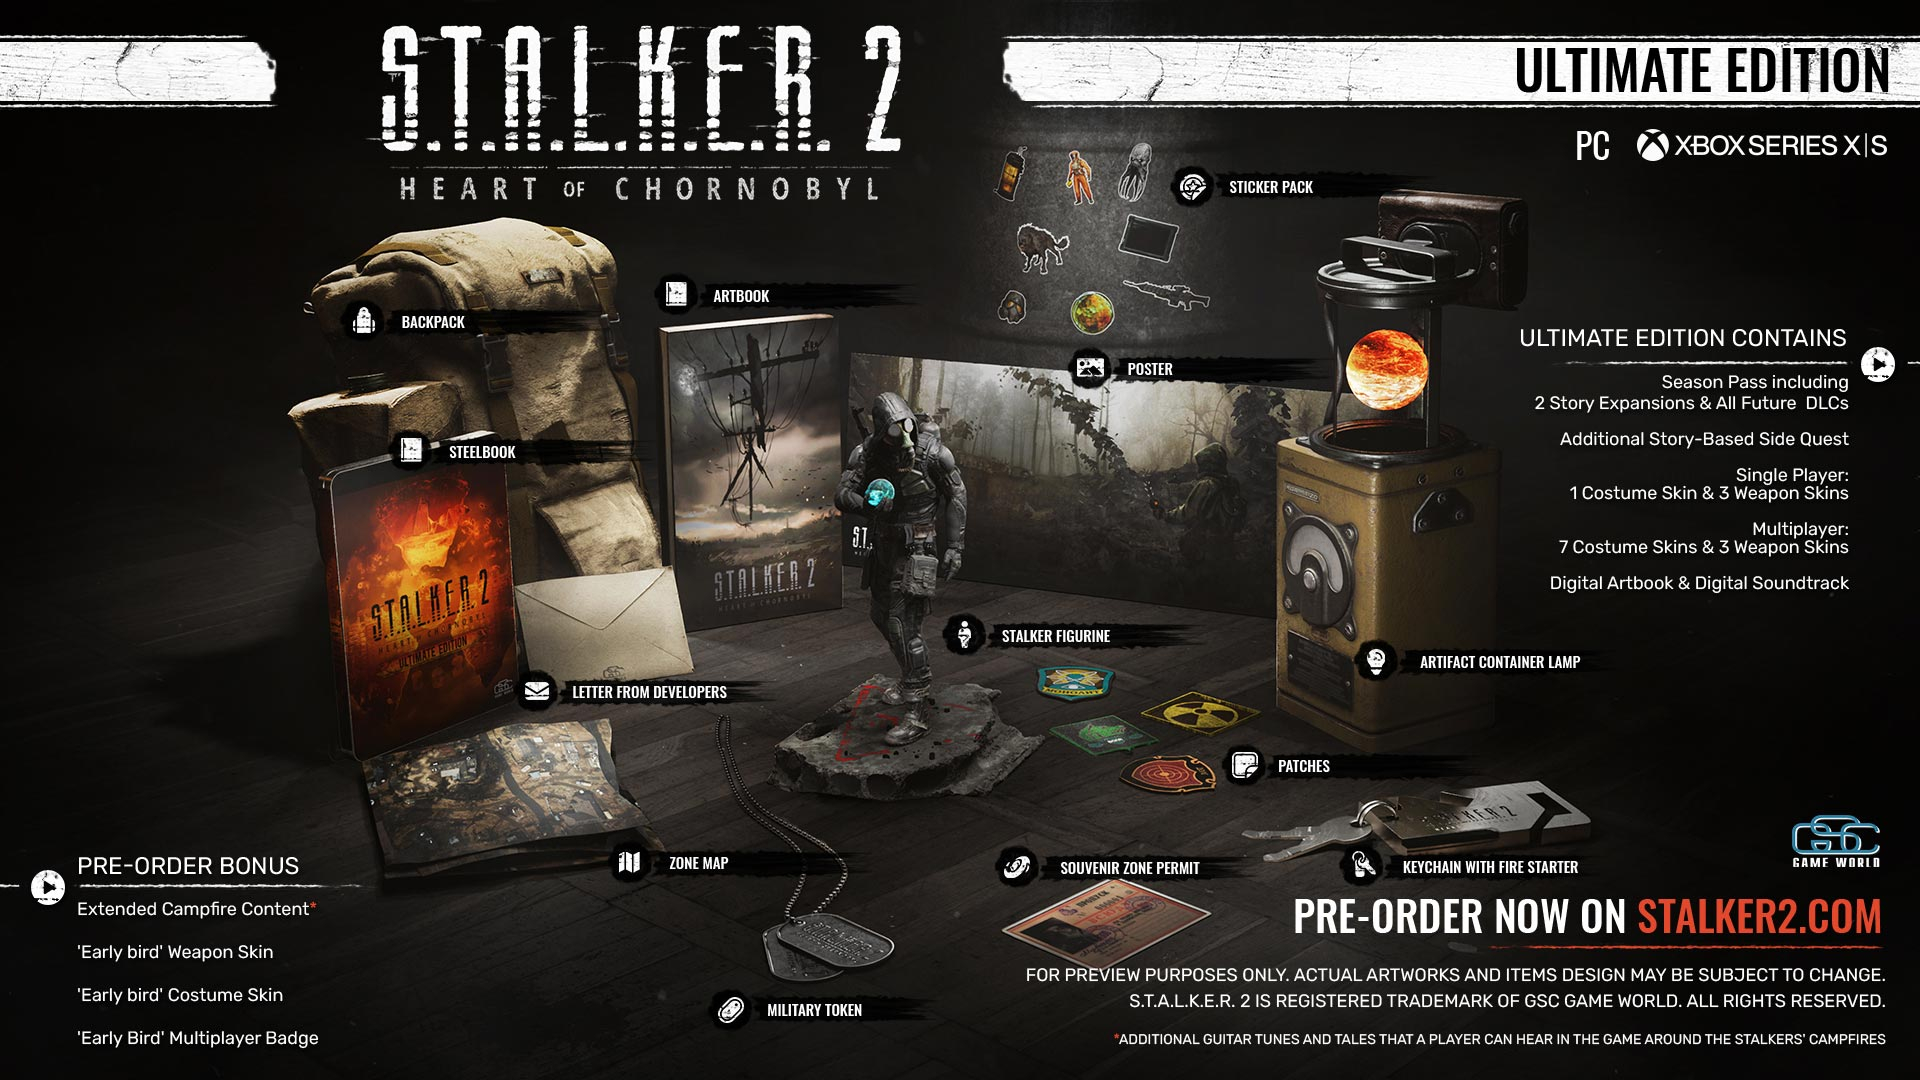 The Stalker 2 Ultimate Edition contents